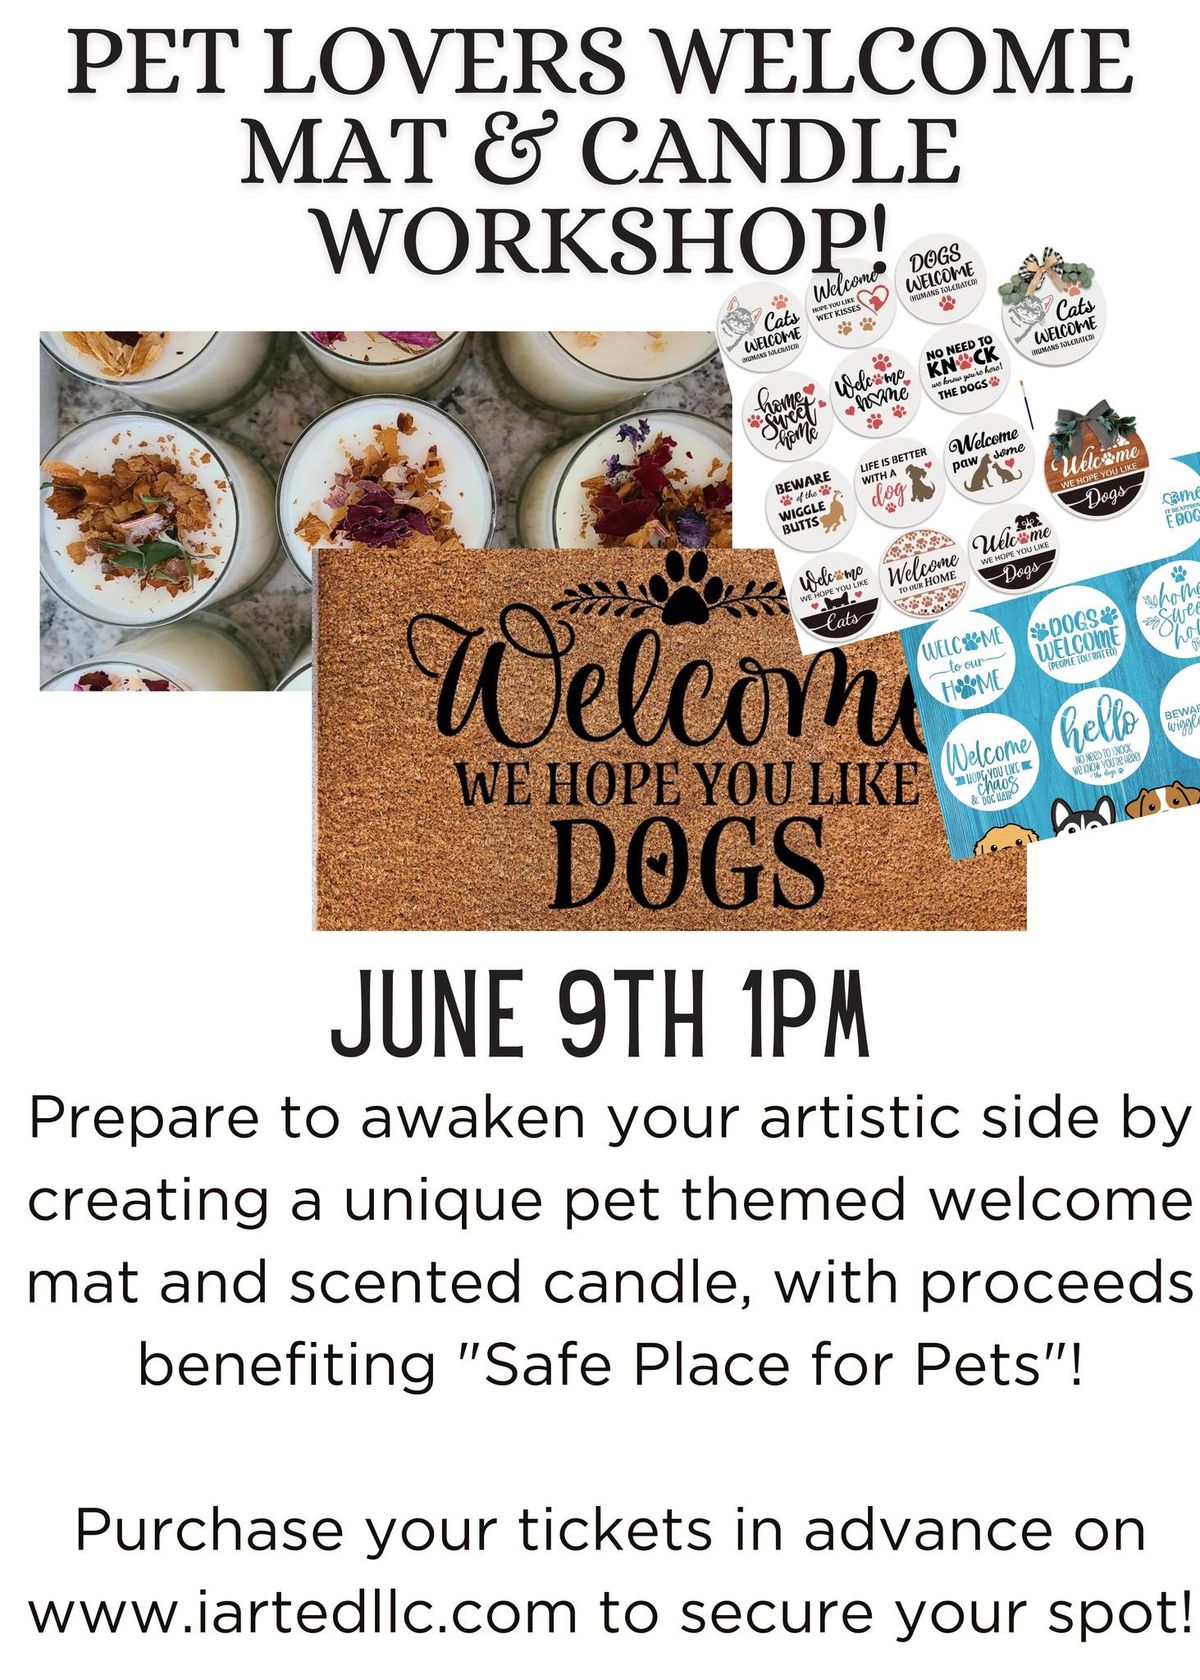 Candle and Door Mat Workshop benefiting Safe Place for Pets